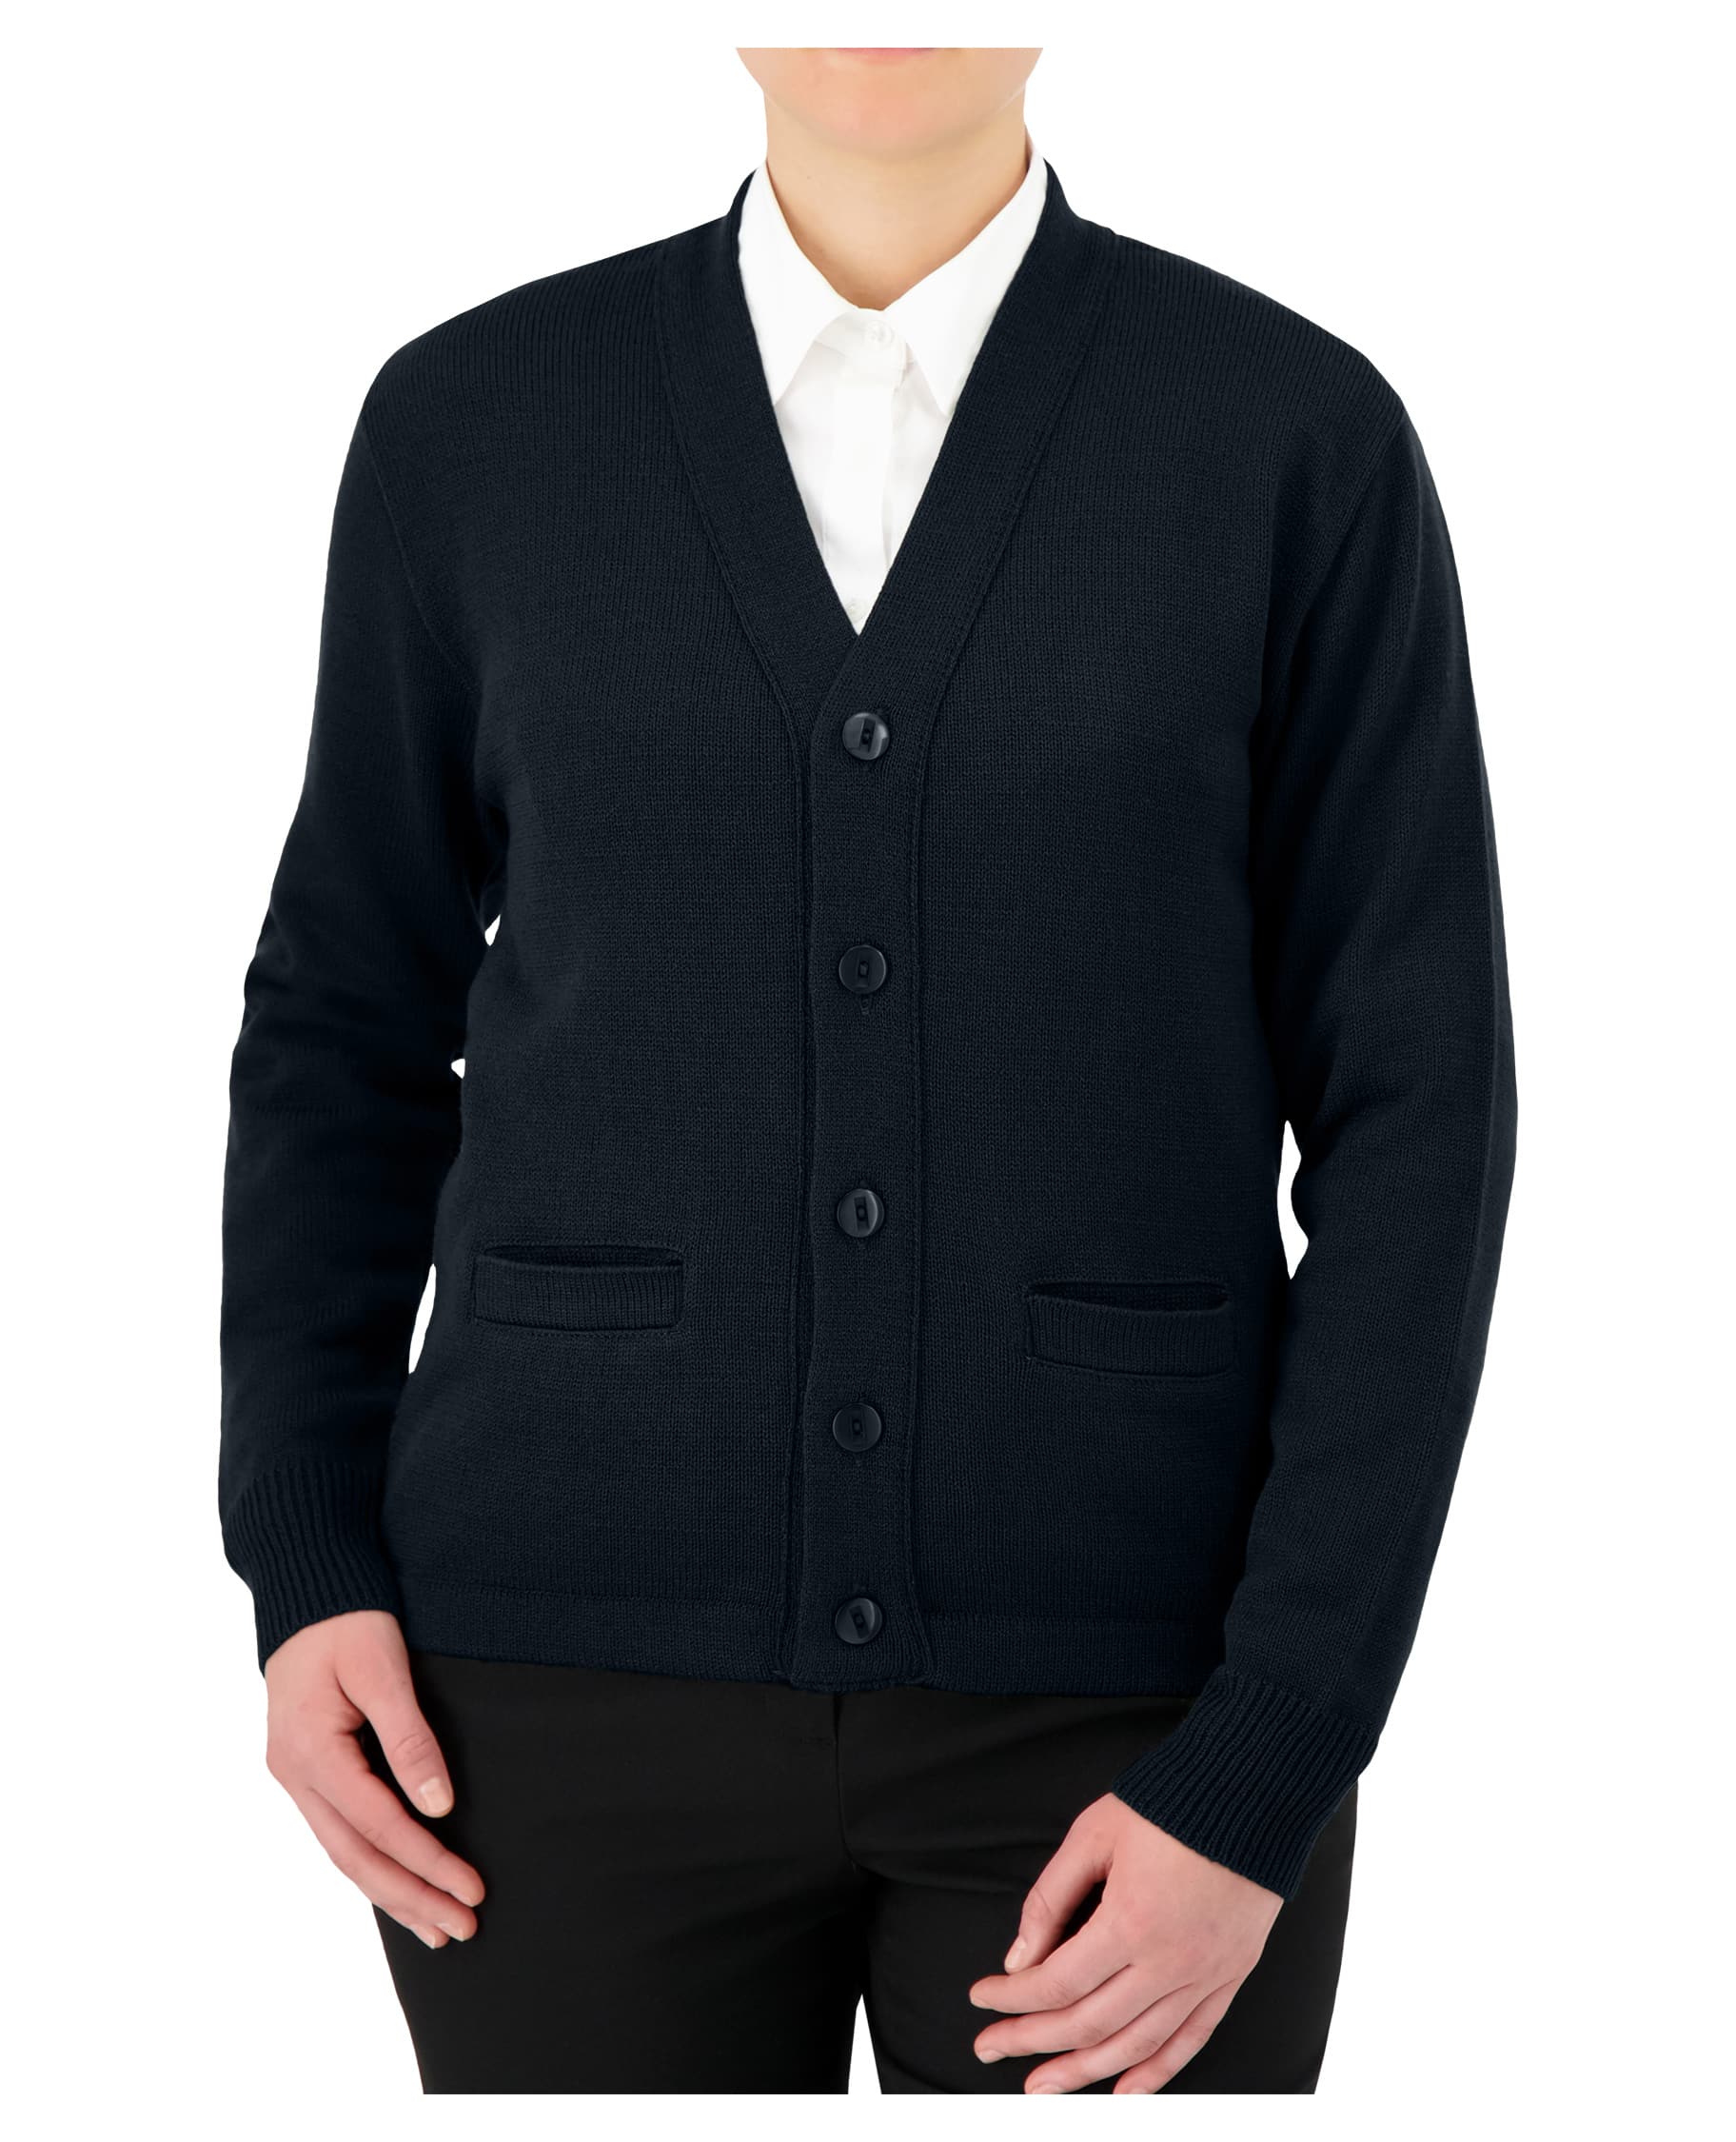 navy v-neck button down cardigan with buttons